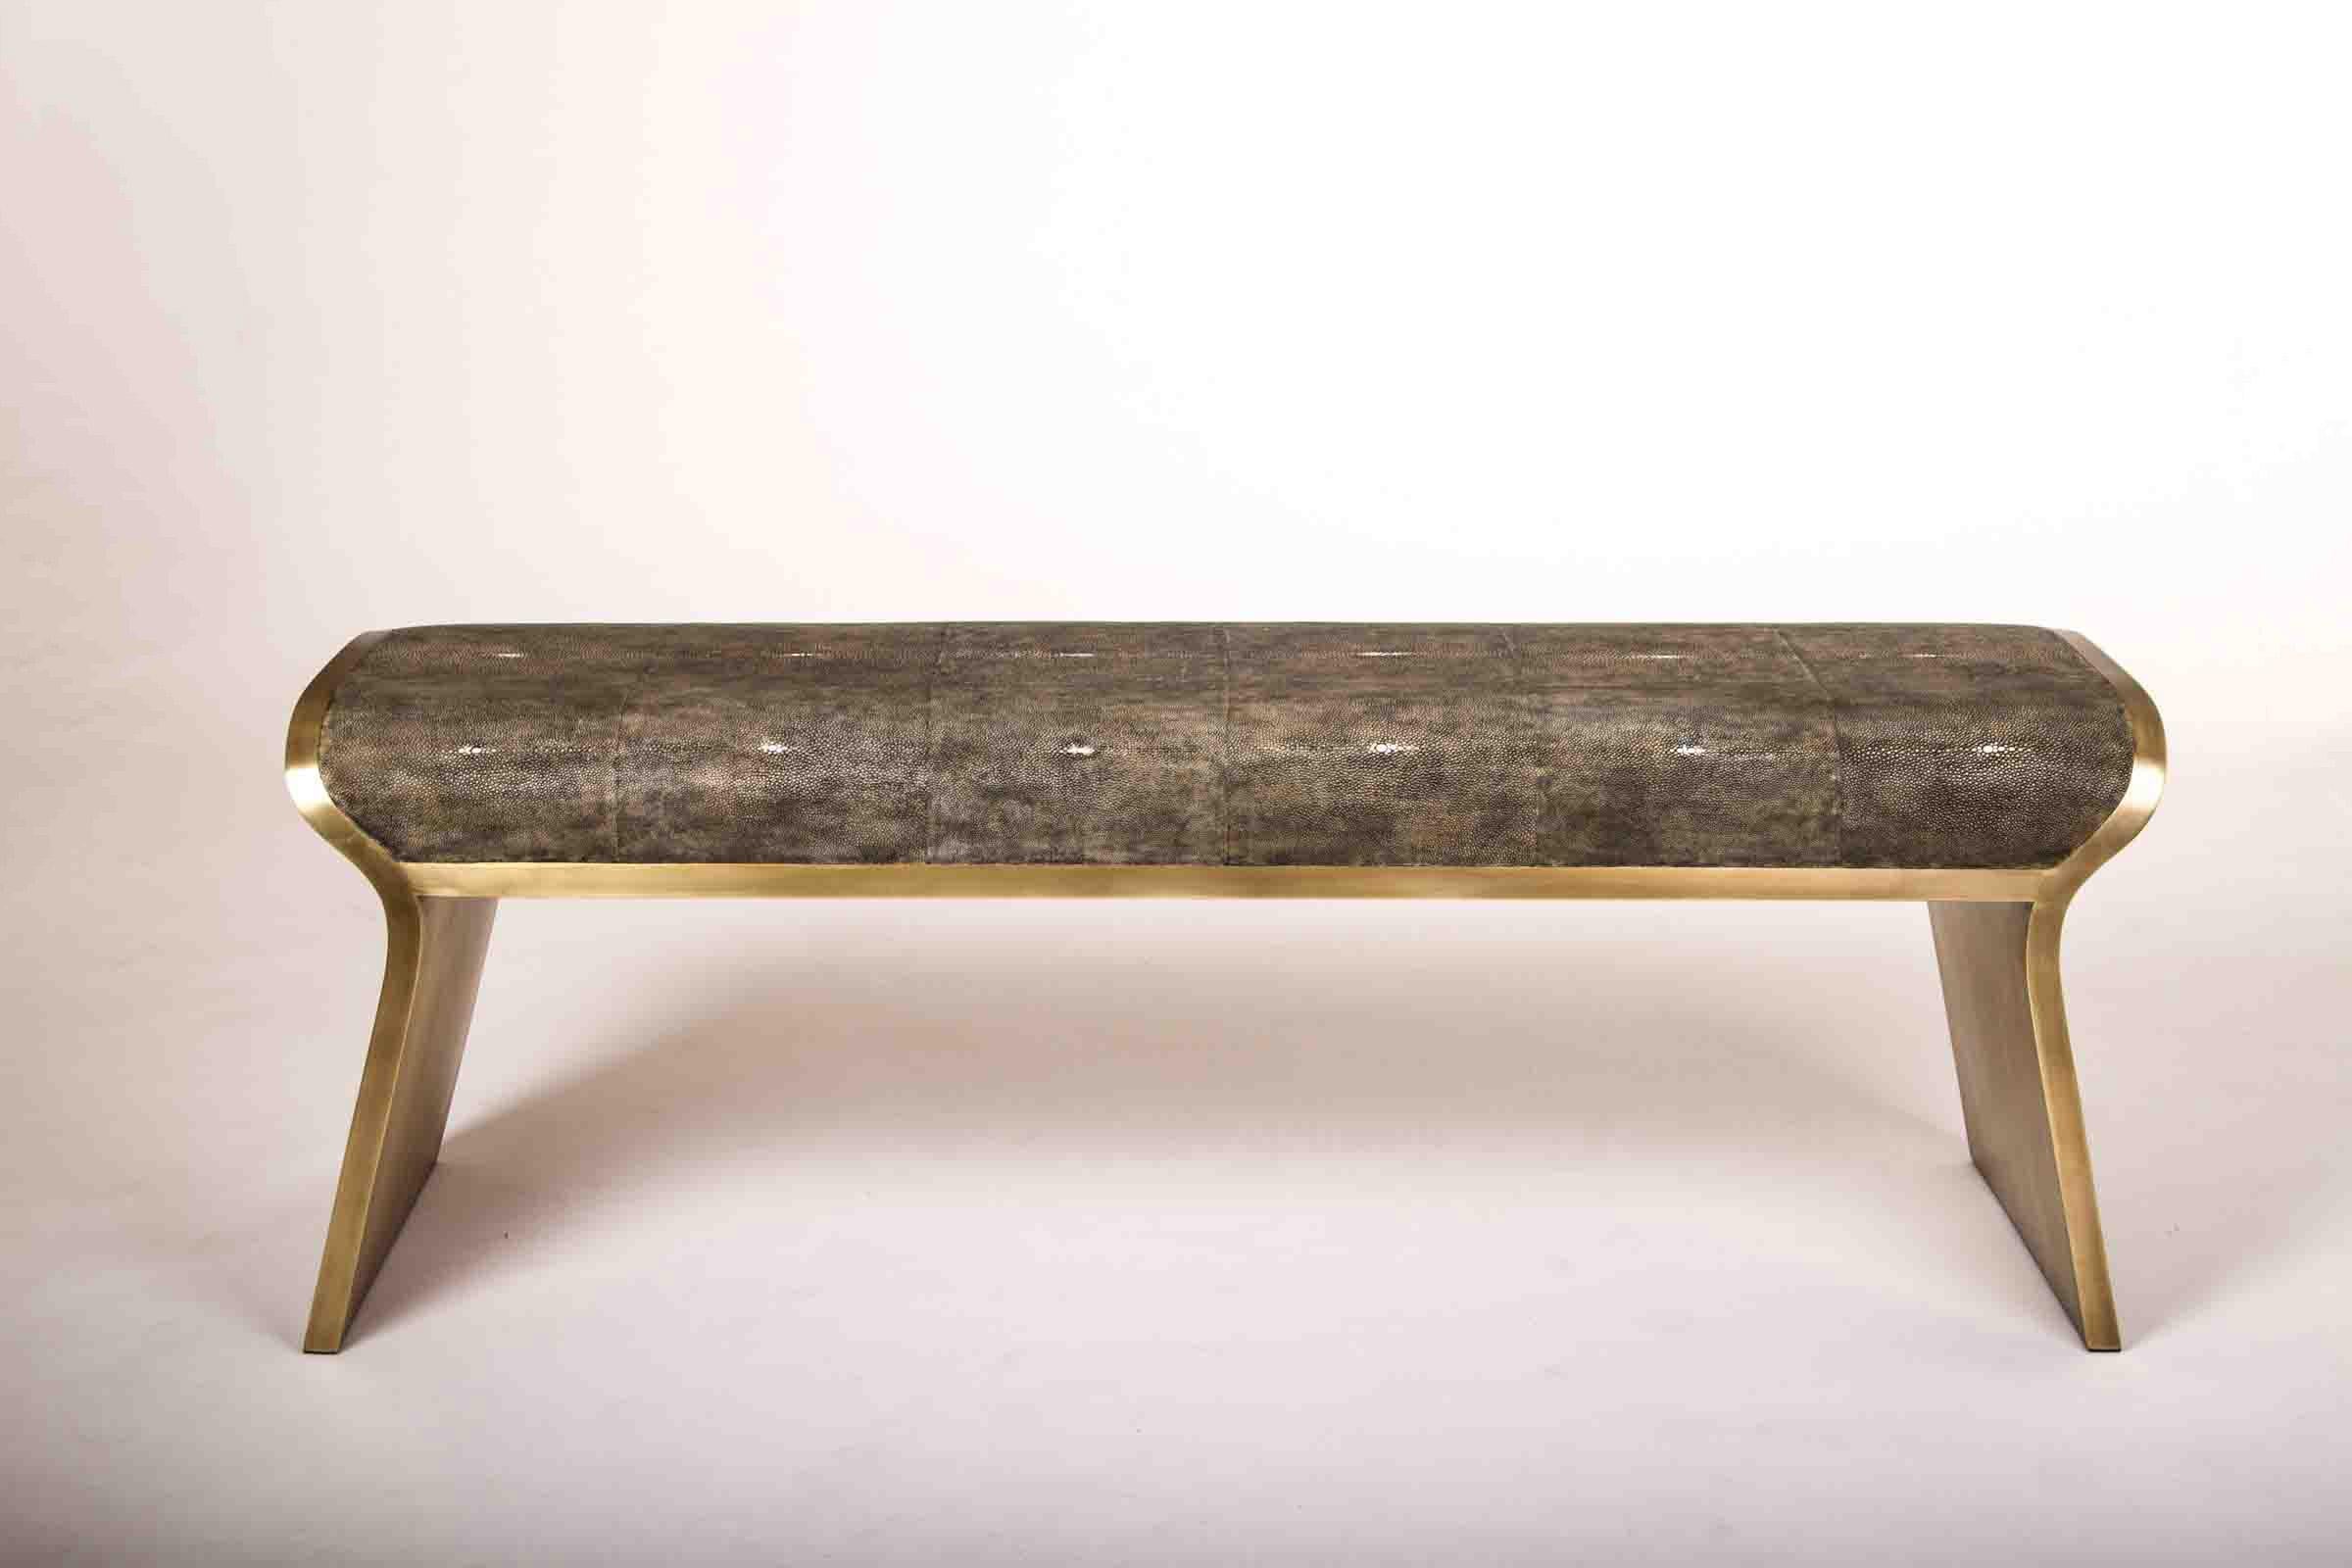 The Dandy day bench is the ultimate luxury seating. The seating area is inlaid in cream shagreen and the frame and sides of the bench are completely inlaid in bronze-patina brass. A coal black shagreen version is available see image at end of slide.